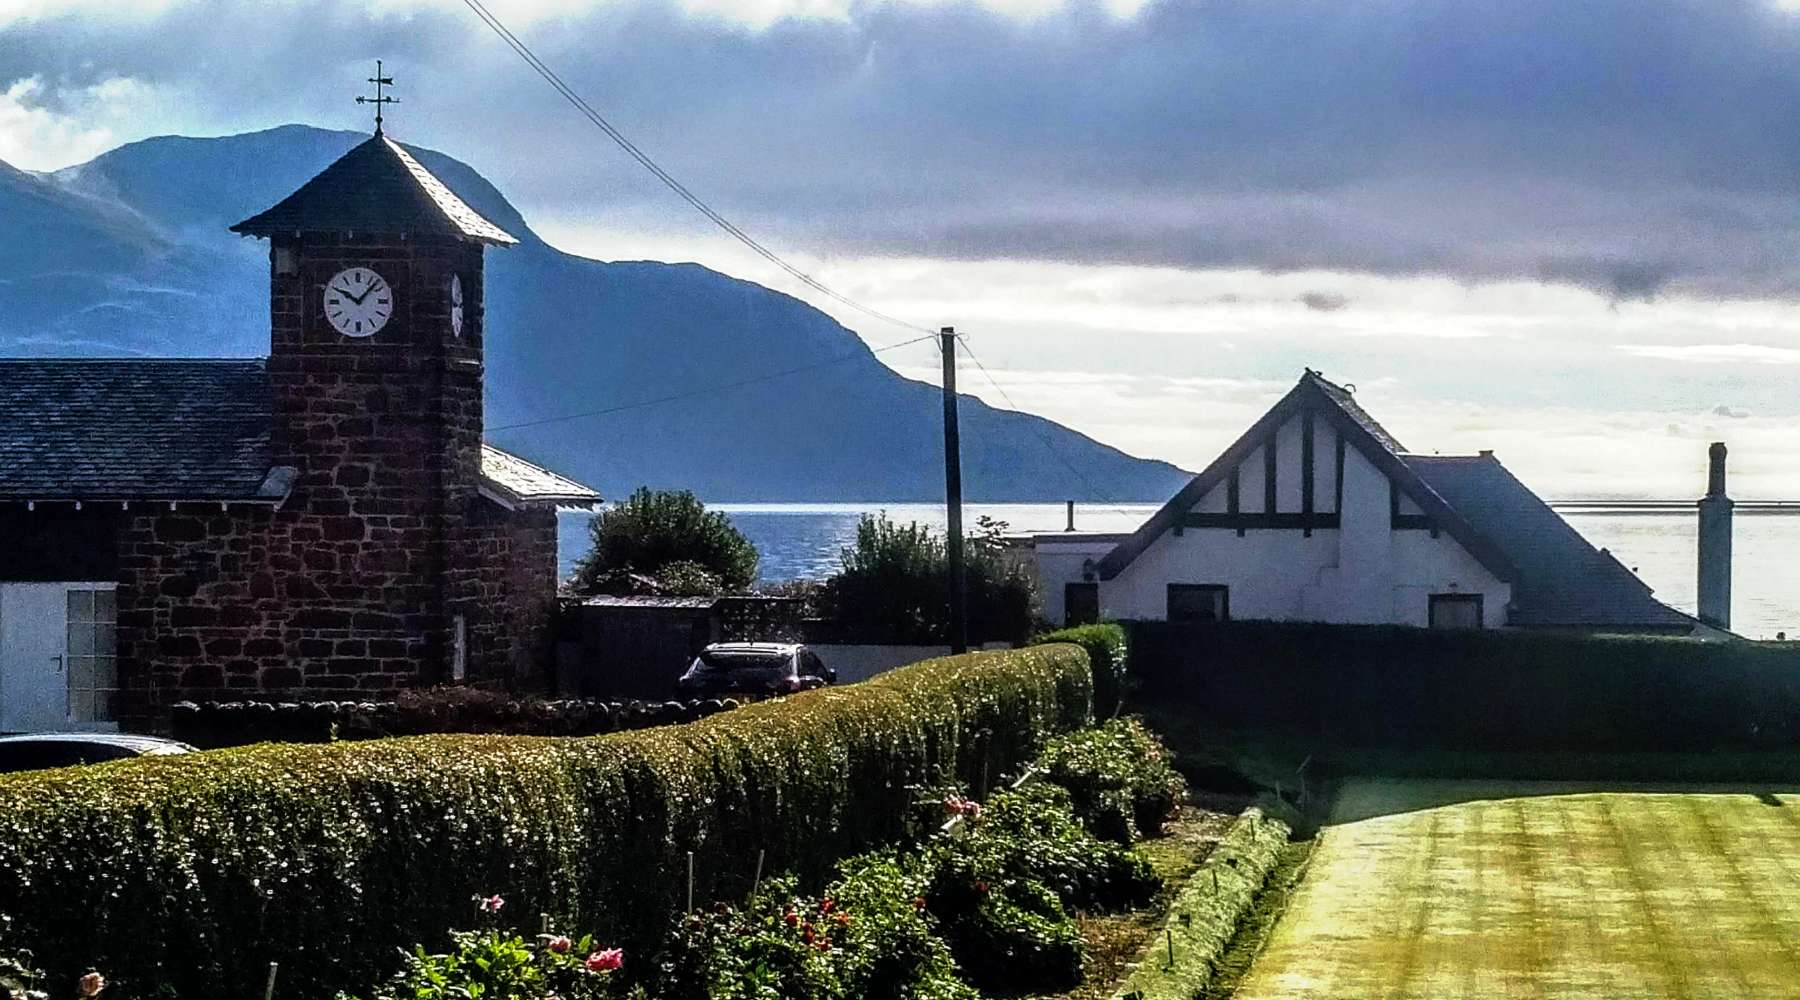 Take a look at the Seagates Brewery Location in Lamalash on the Isle of Arran